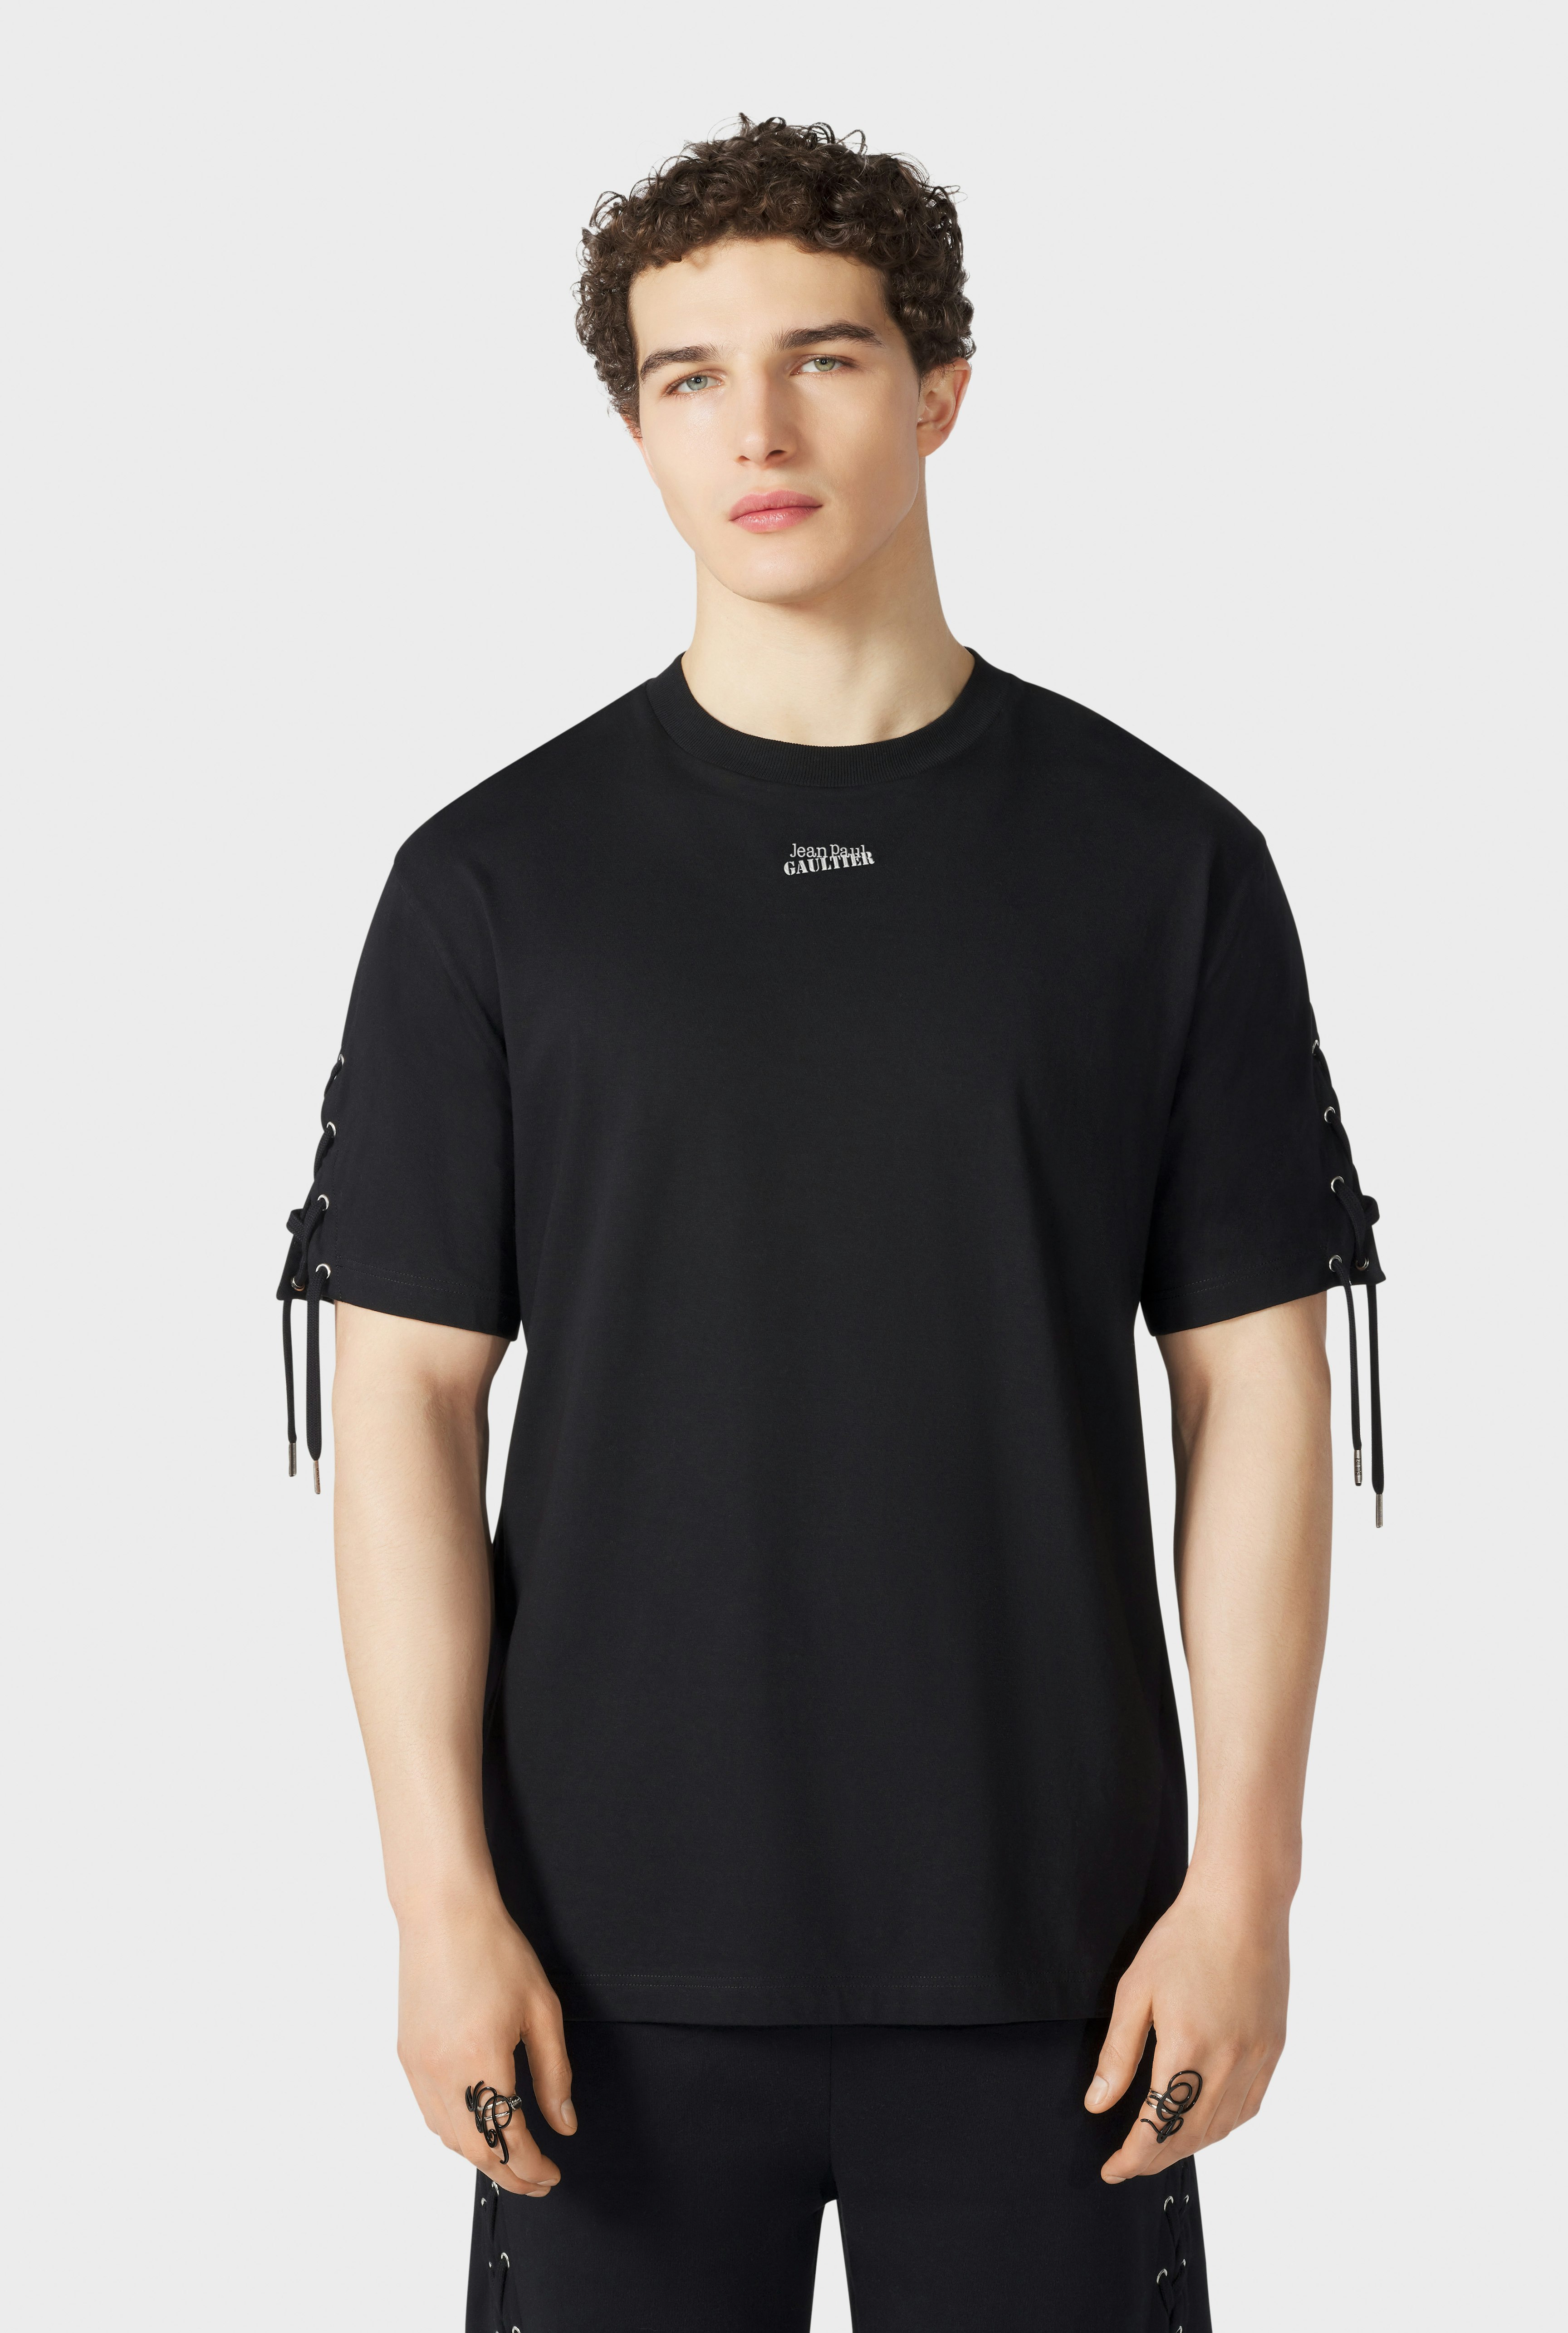 The Black Lace-Up JPG T-Shirt hover